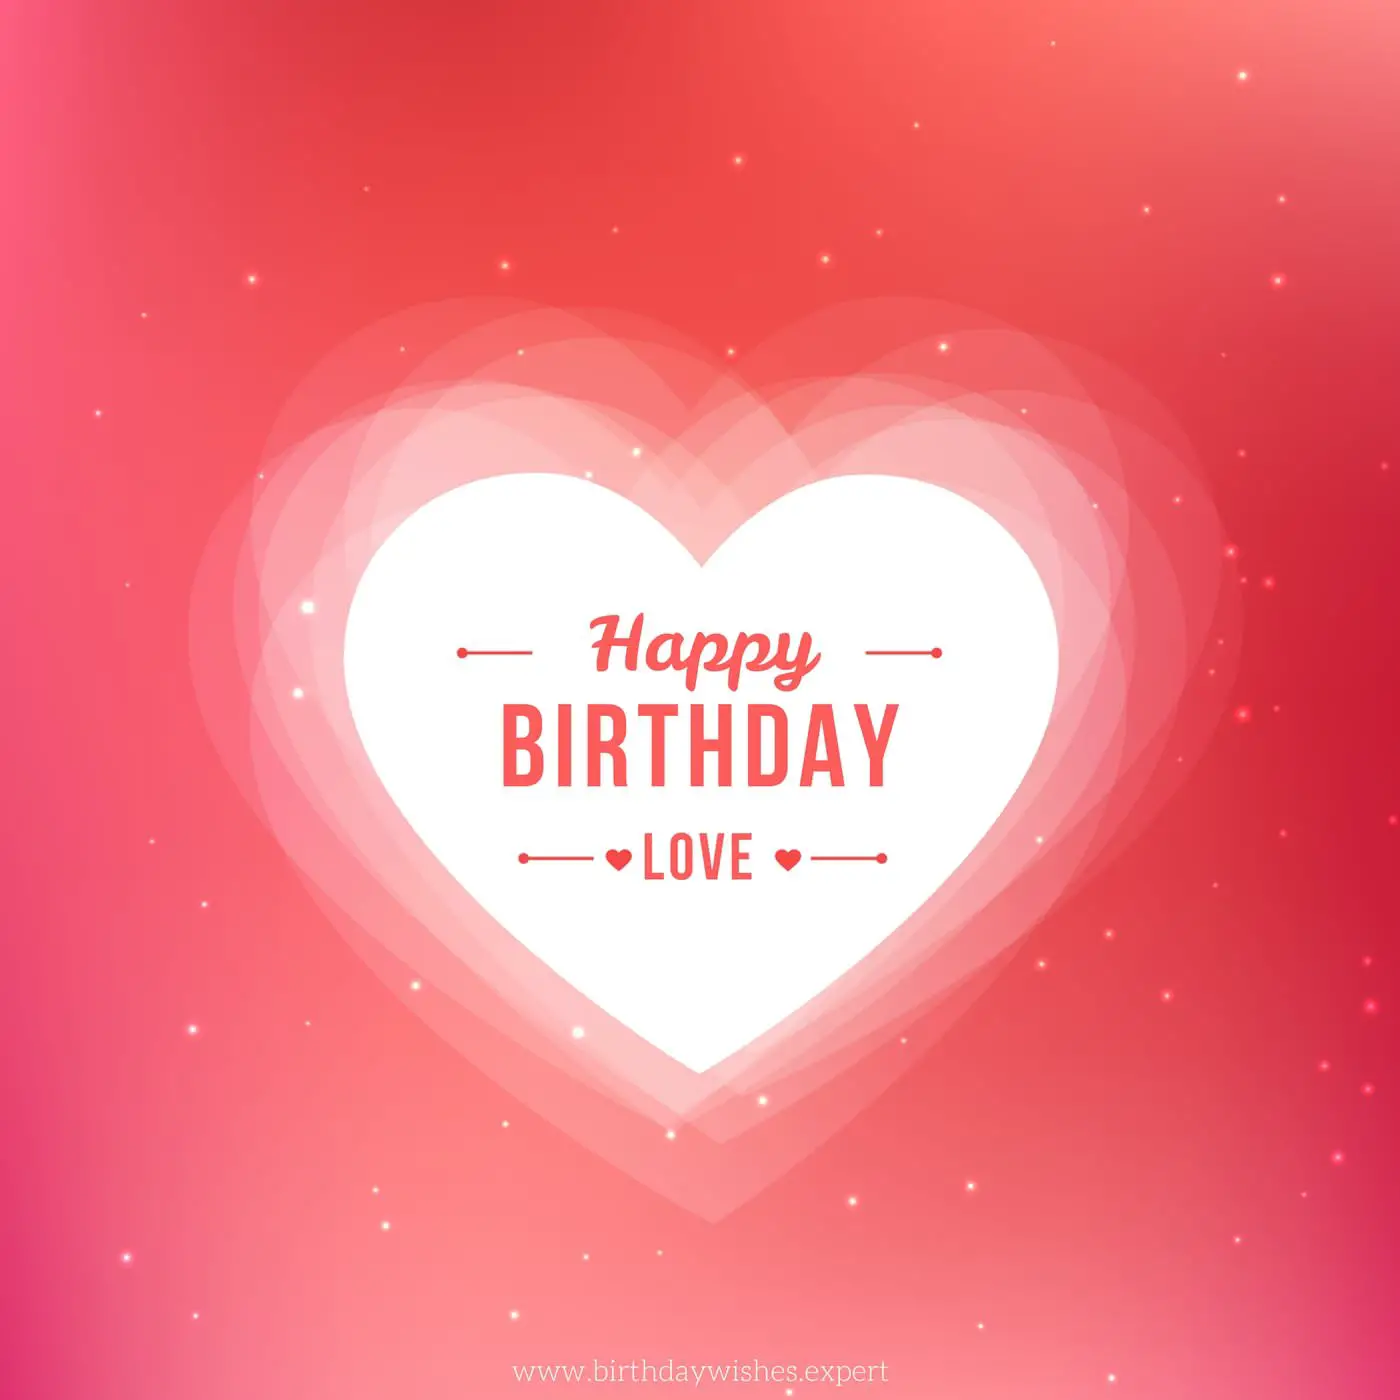 Happy Birthday Letter To Your Girlfriend from www.birthdaywishes.expert